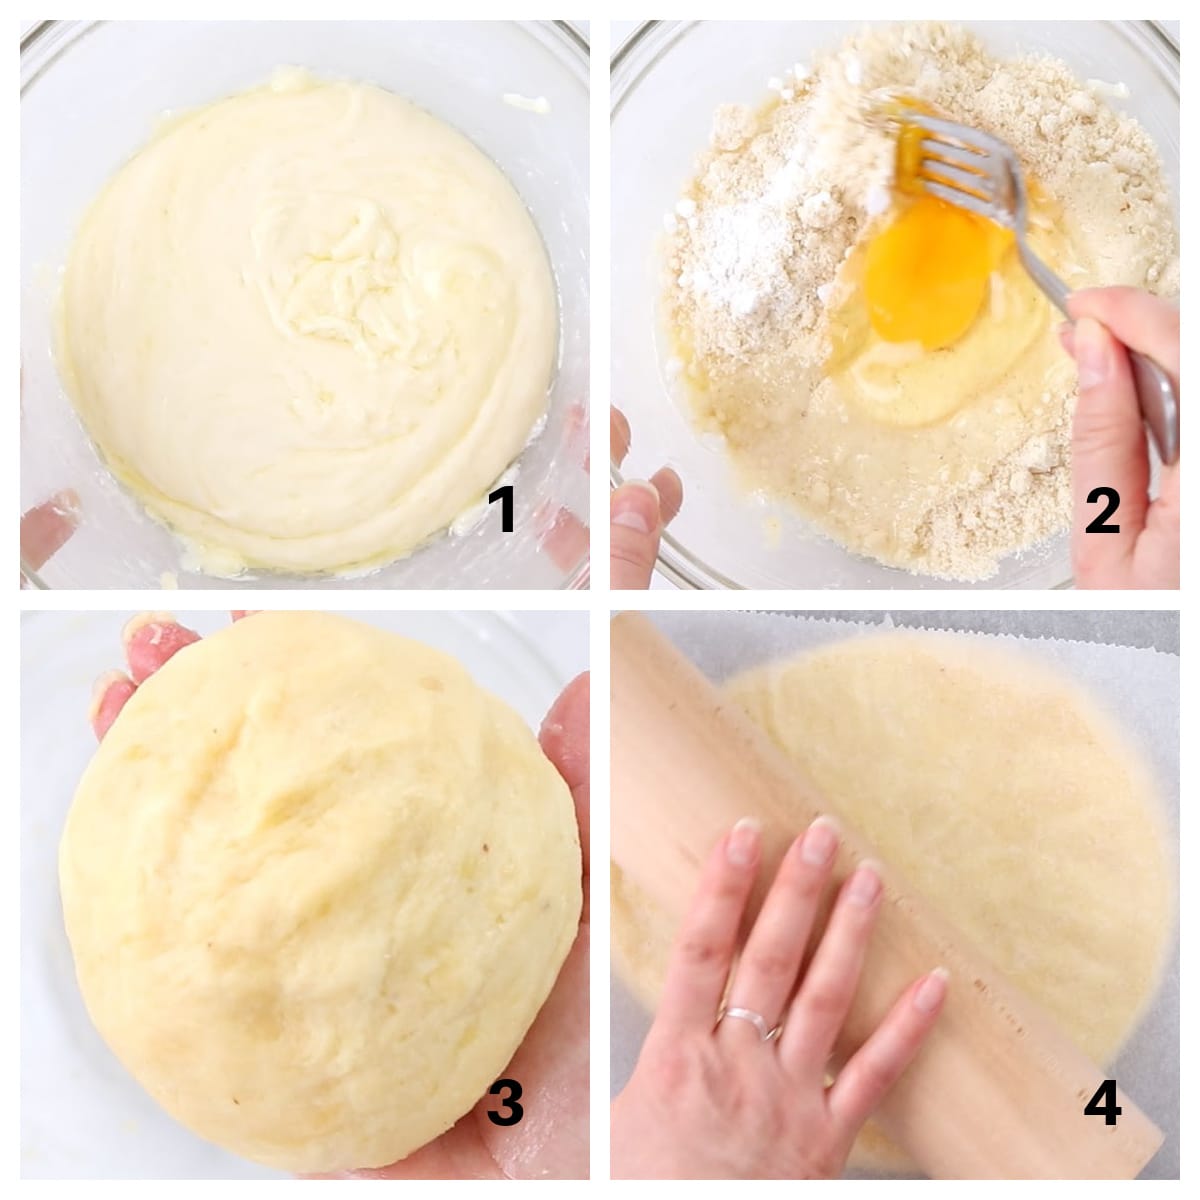 Melted mozzarella in a bowl, mixing flour and egg into the dough, hand holding a dough ball and rolling out the dough.